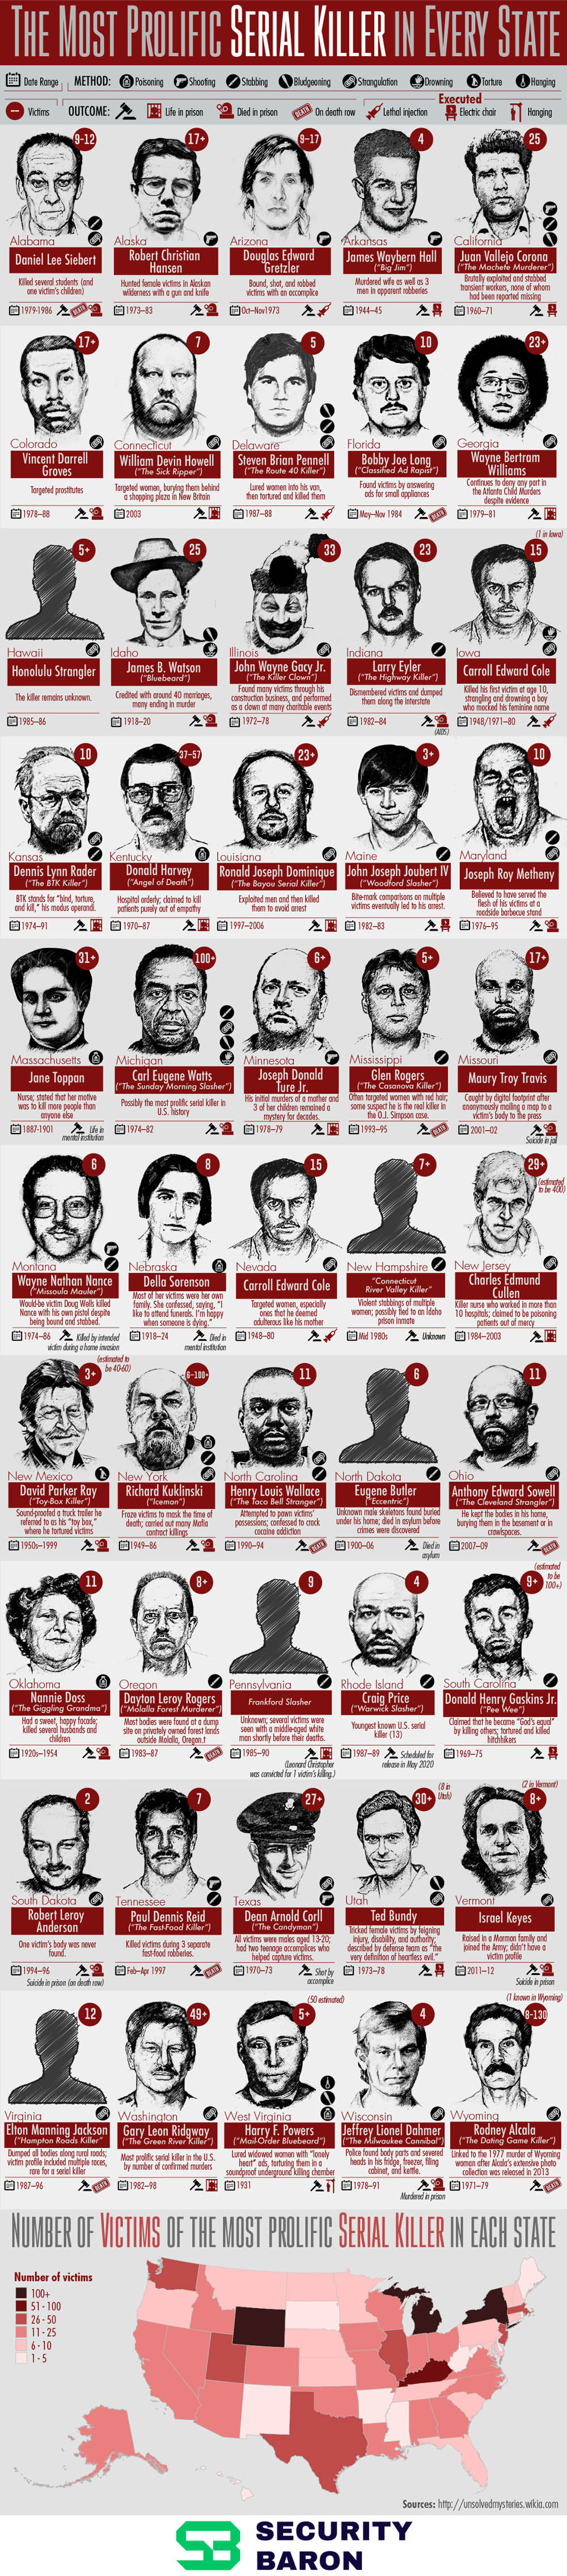 The Most Prolific Serial Killer in Every US State